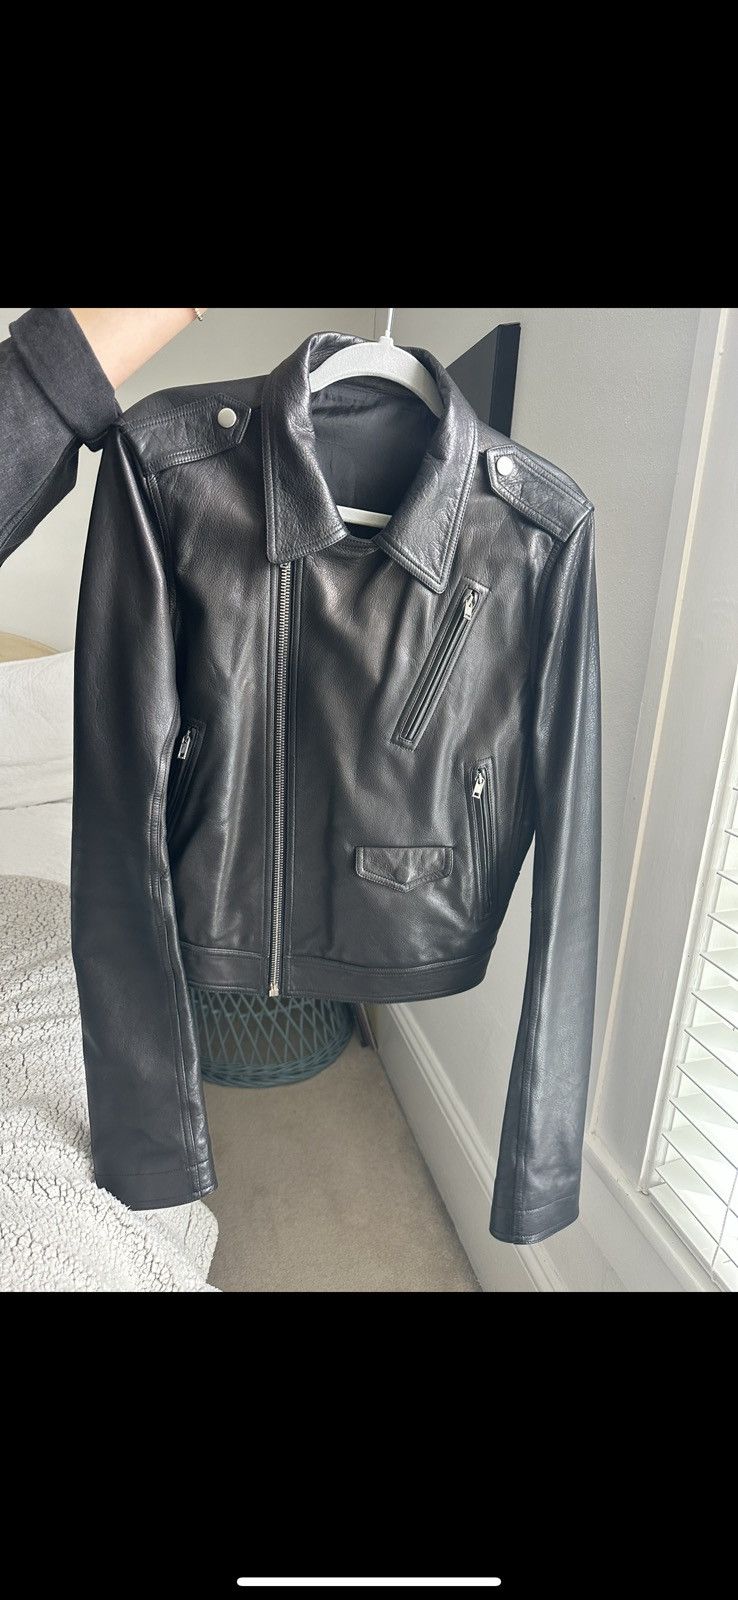 Rick Owens SS18 DIRT CROPPED STOOGES LEATHER JACKET | Grailed